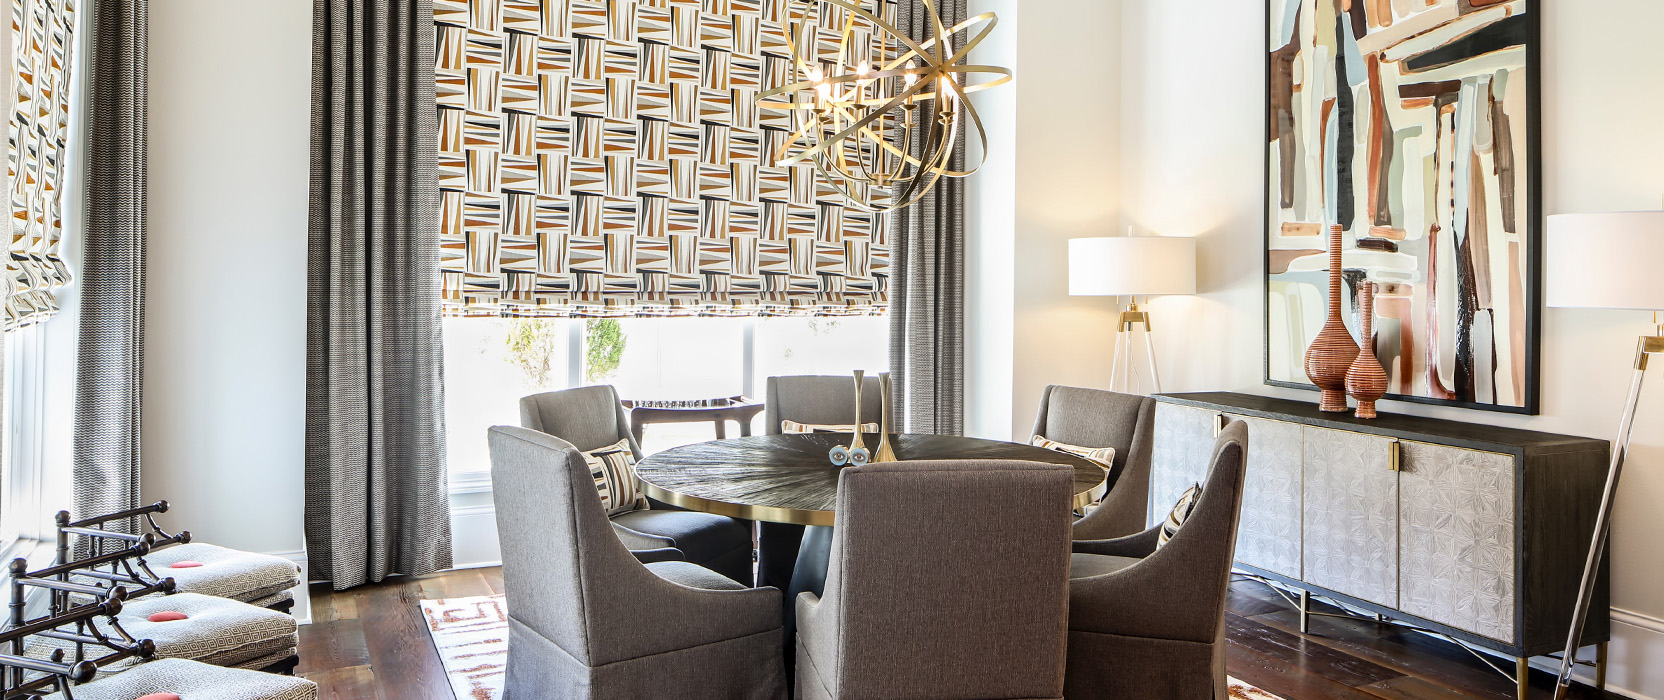 Boldly designed dining room with round table encircled by six upholstered dining chairs, patterned window coverings and modern gold orb chandelier.